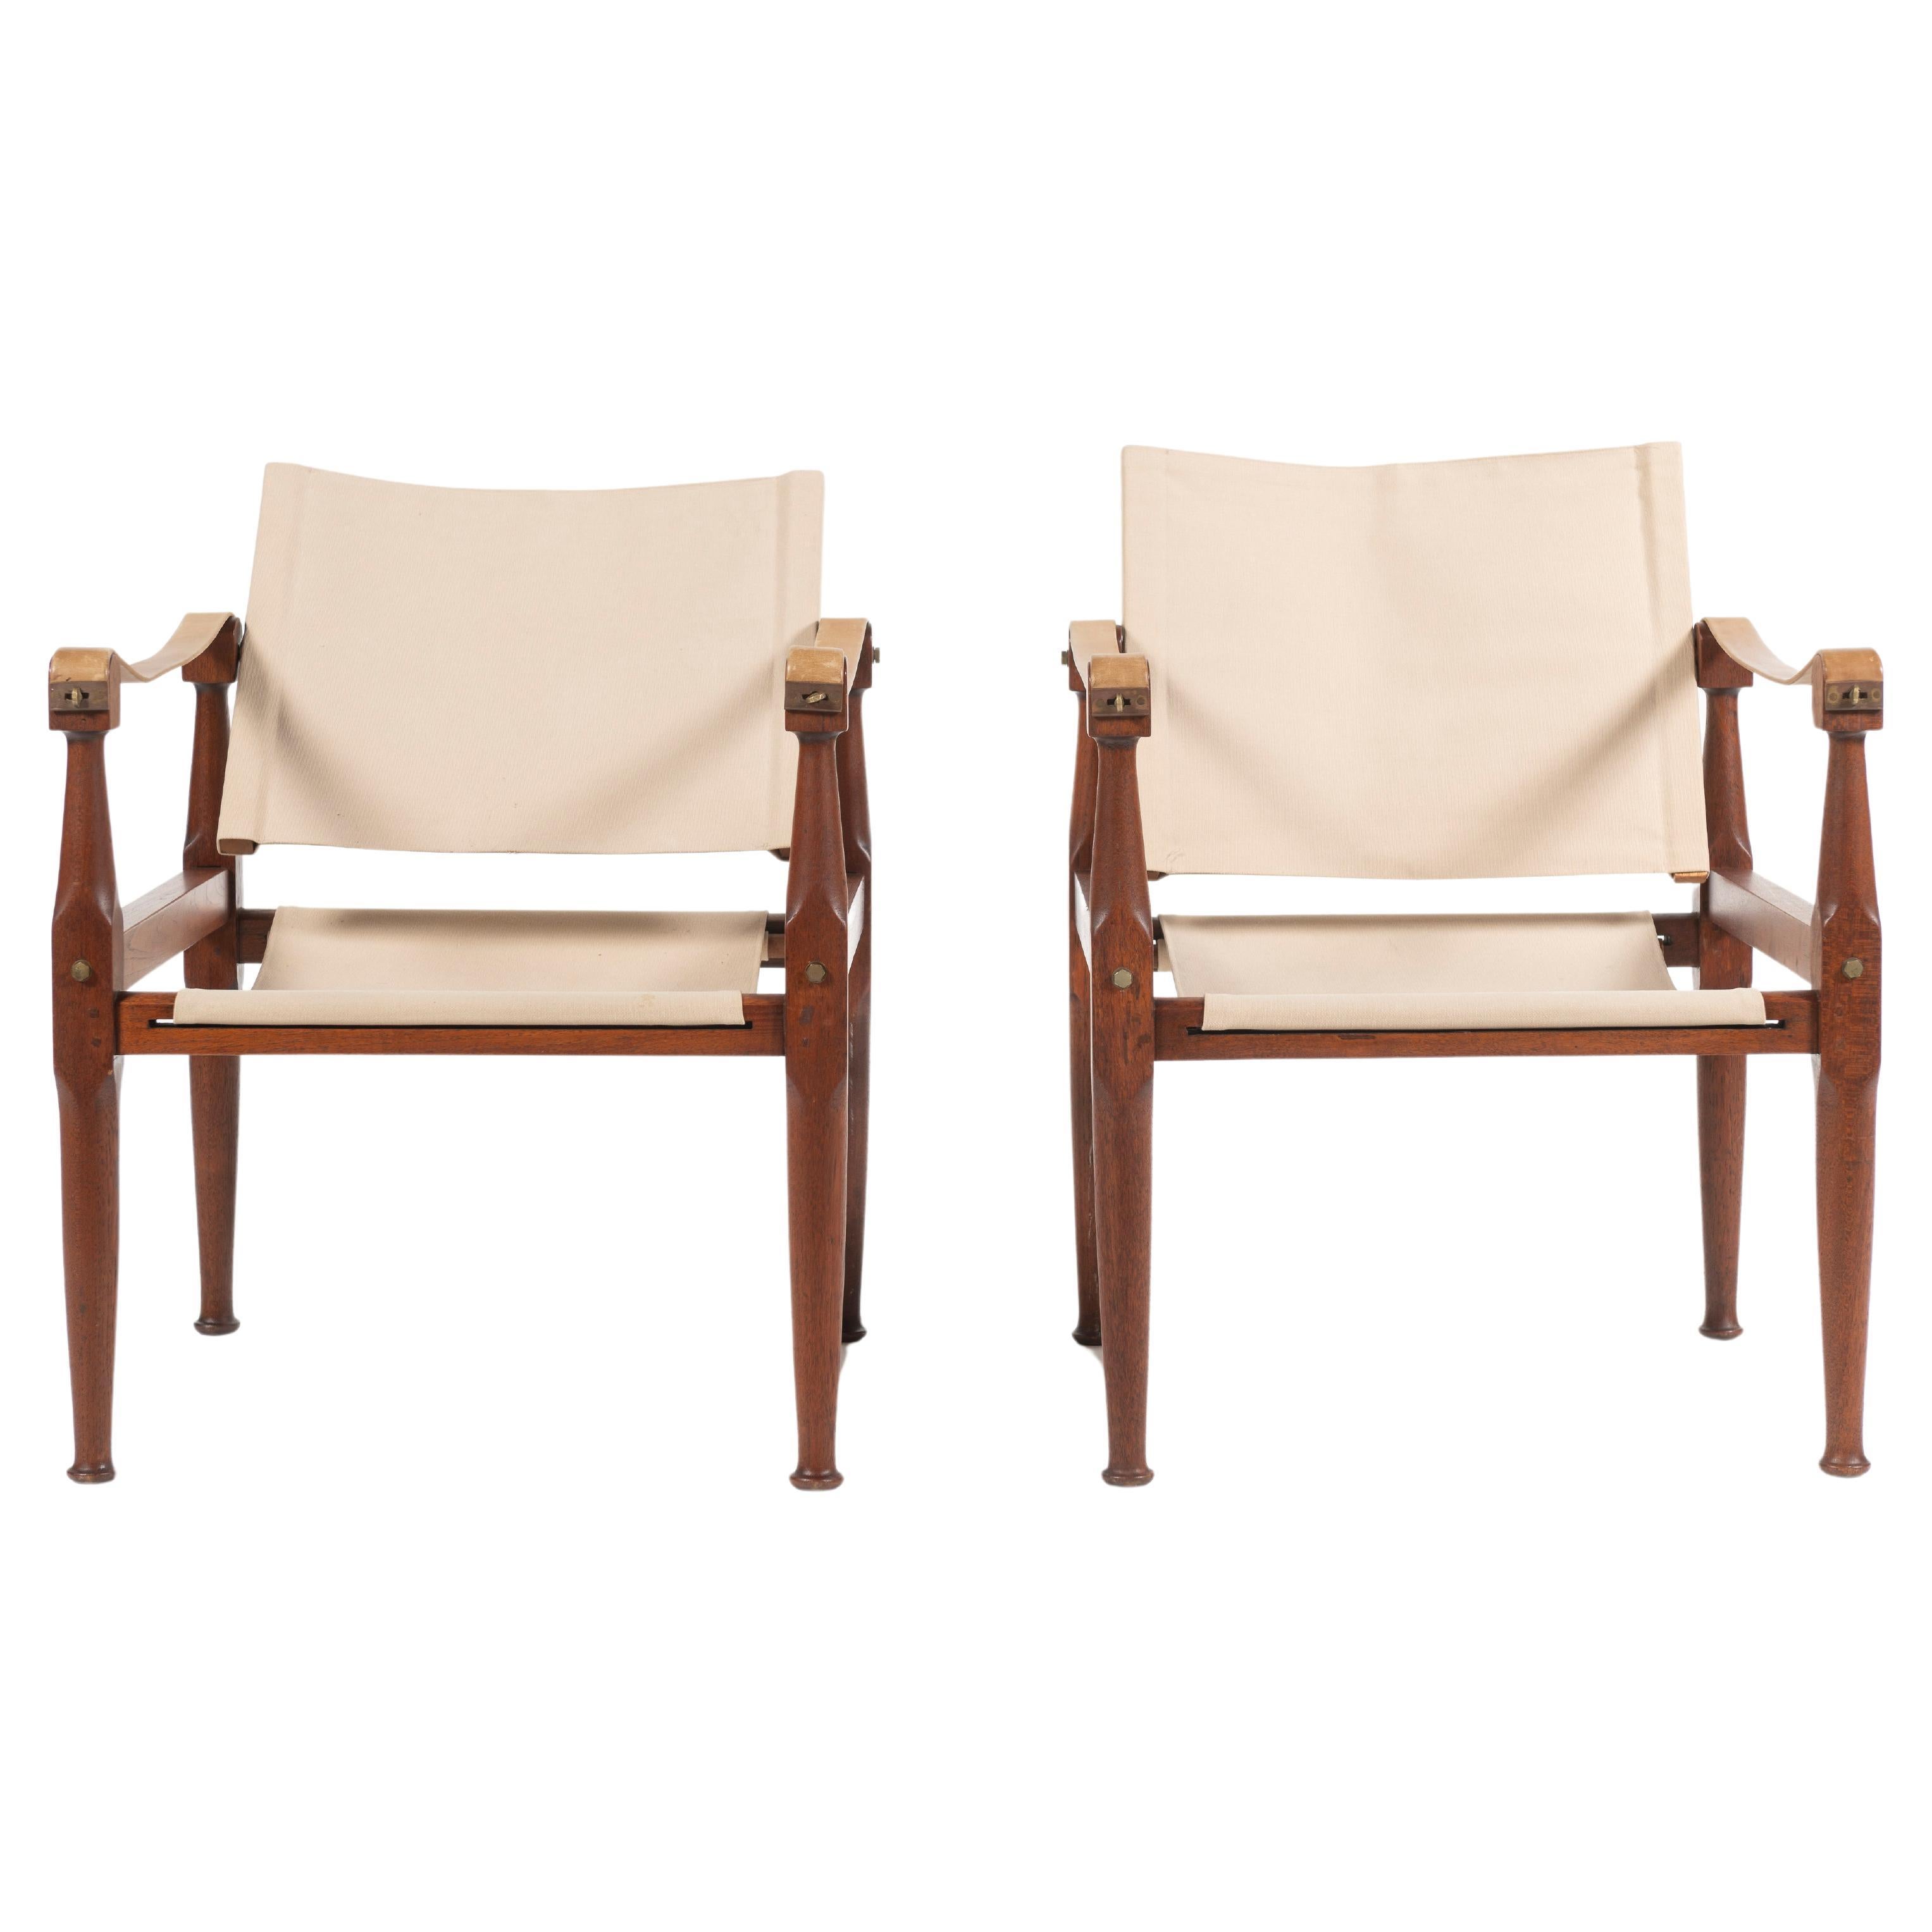 Wonderful pair of campaign chairs in teak, leather, canvas and brass inspired by Kaare Klint. Chairs are in good condition given their age and wear. Comfortable, casual and classic at once. Manufactured in Denmark, 1960. 